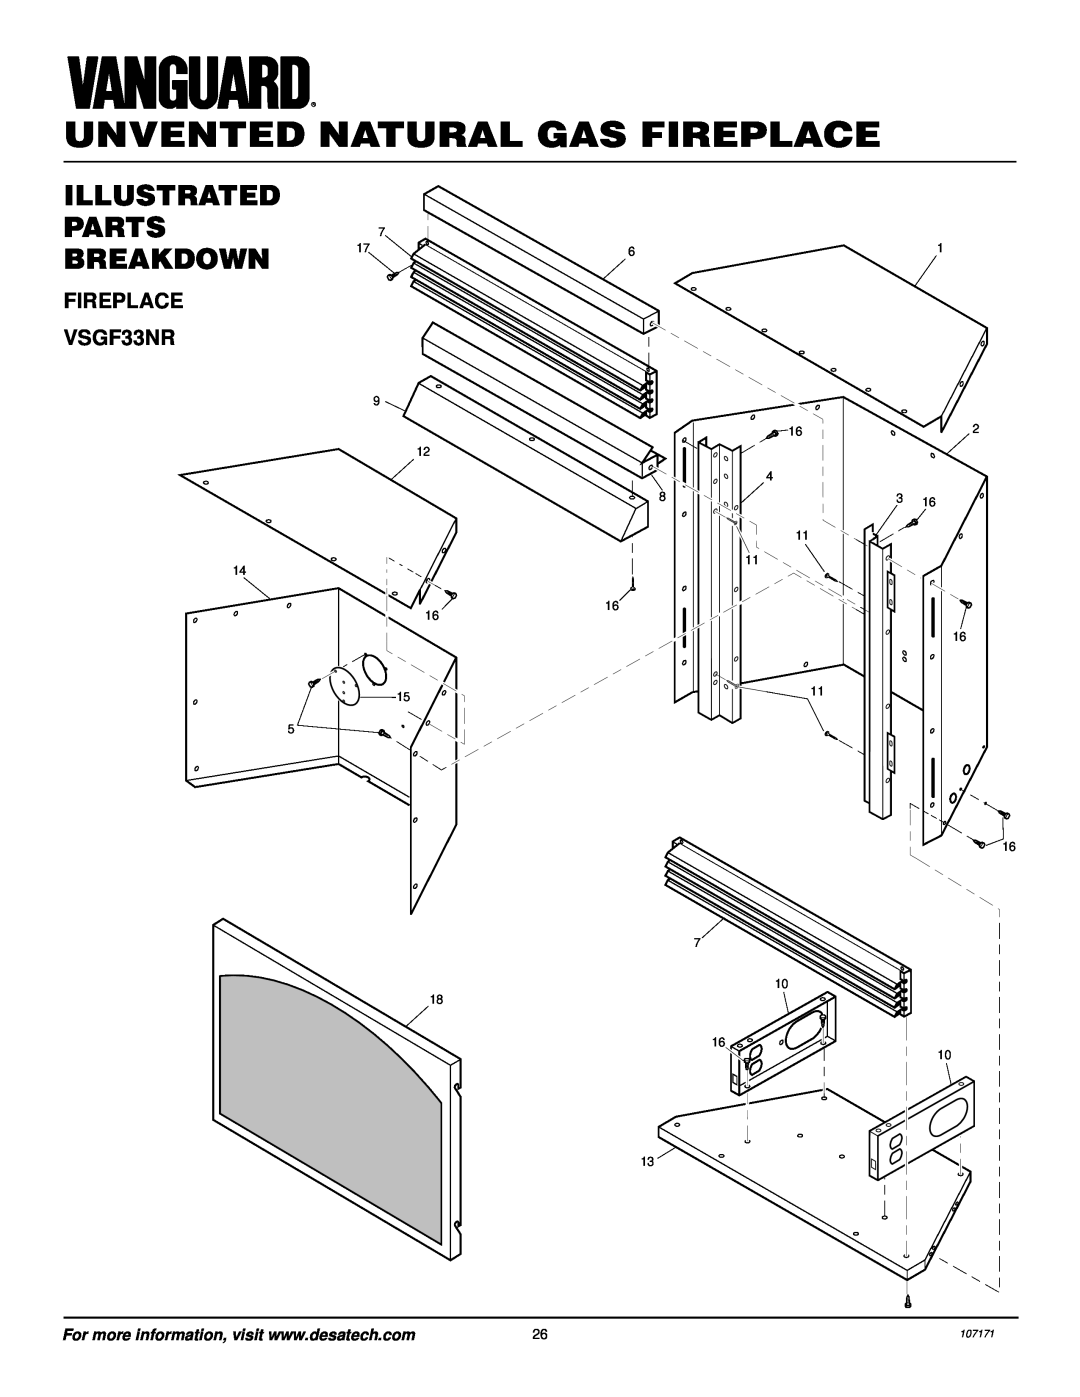 Desa installation manual ILLUSTRATED PARTS7, Breakdown, FIREPLACE VSGF33NR, Unvented Natural Gas Fireplace, 107171 